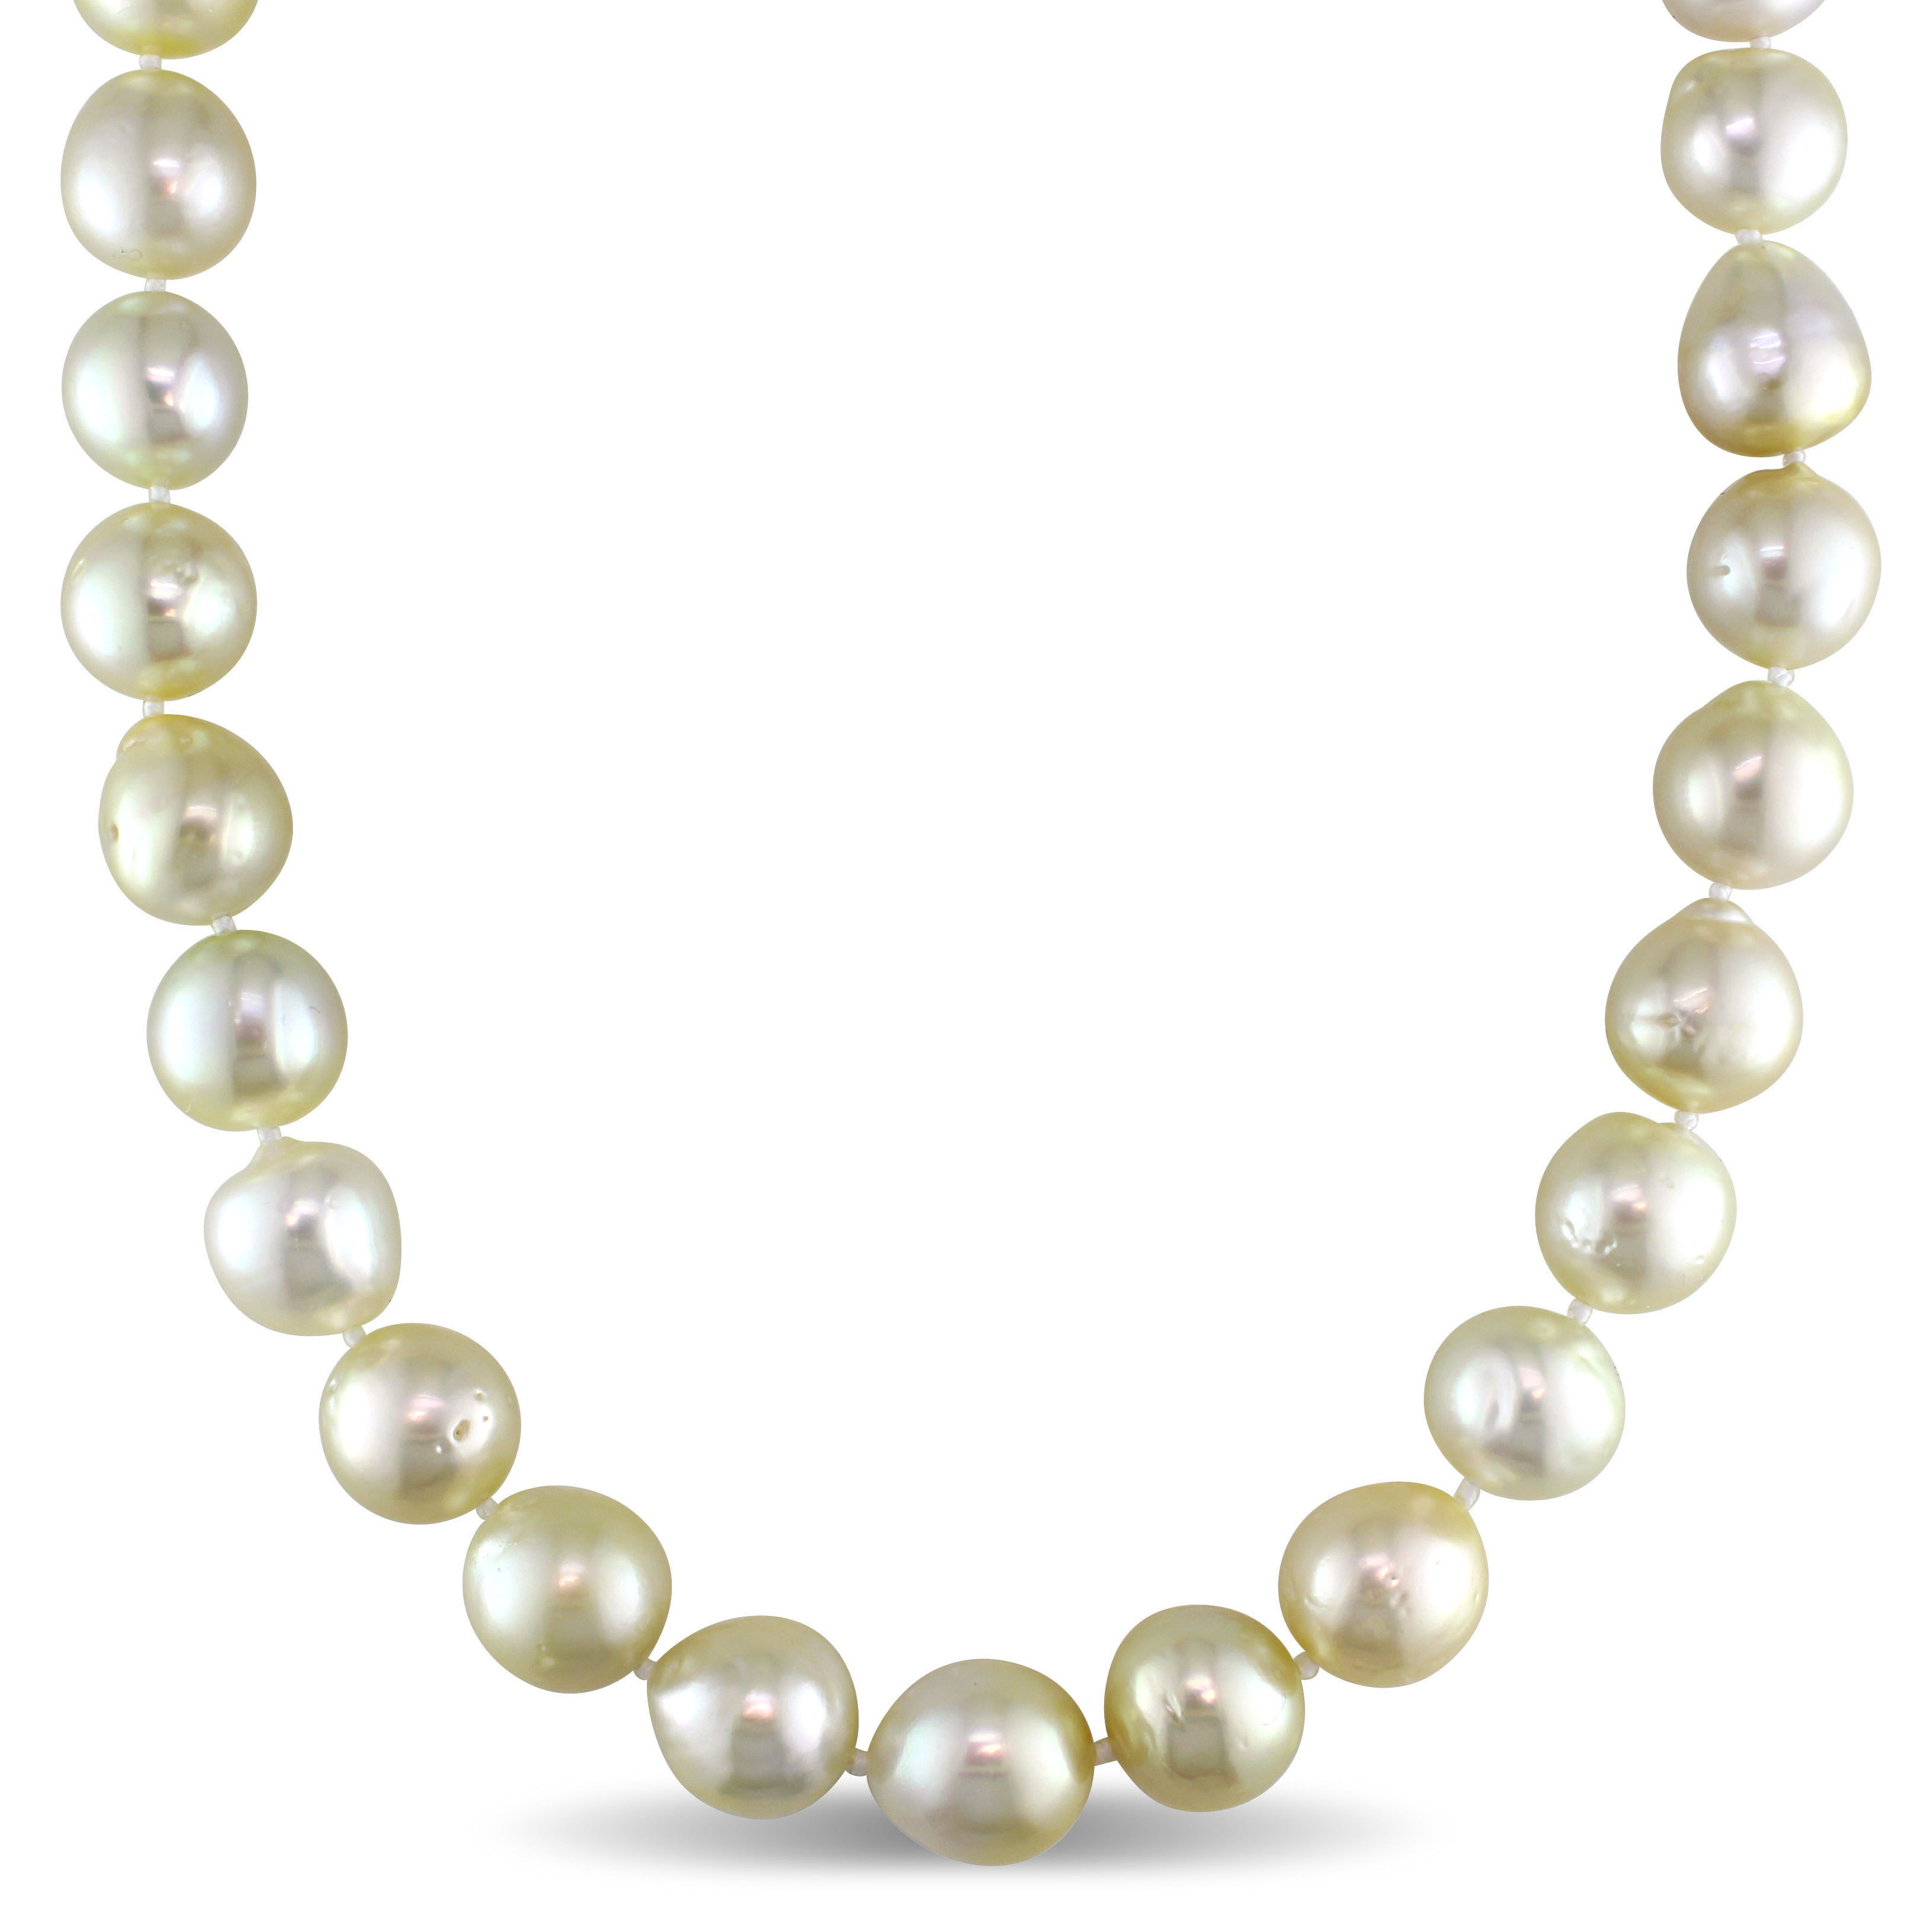 11-12 MM Natural Shape Golden South Sea Pearl Strand Necklace with 14k Yellow Gold Clasp - 18 in